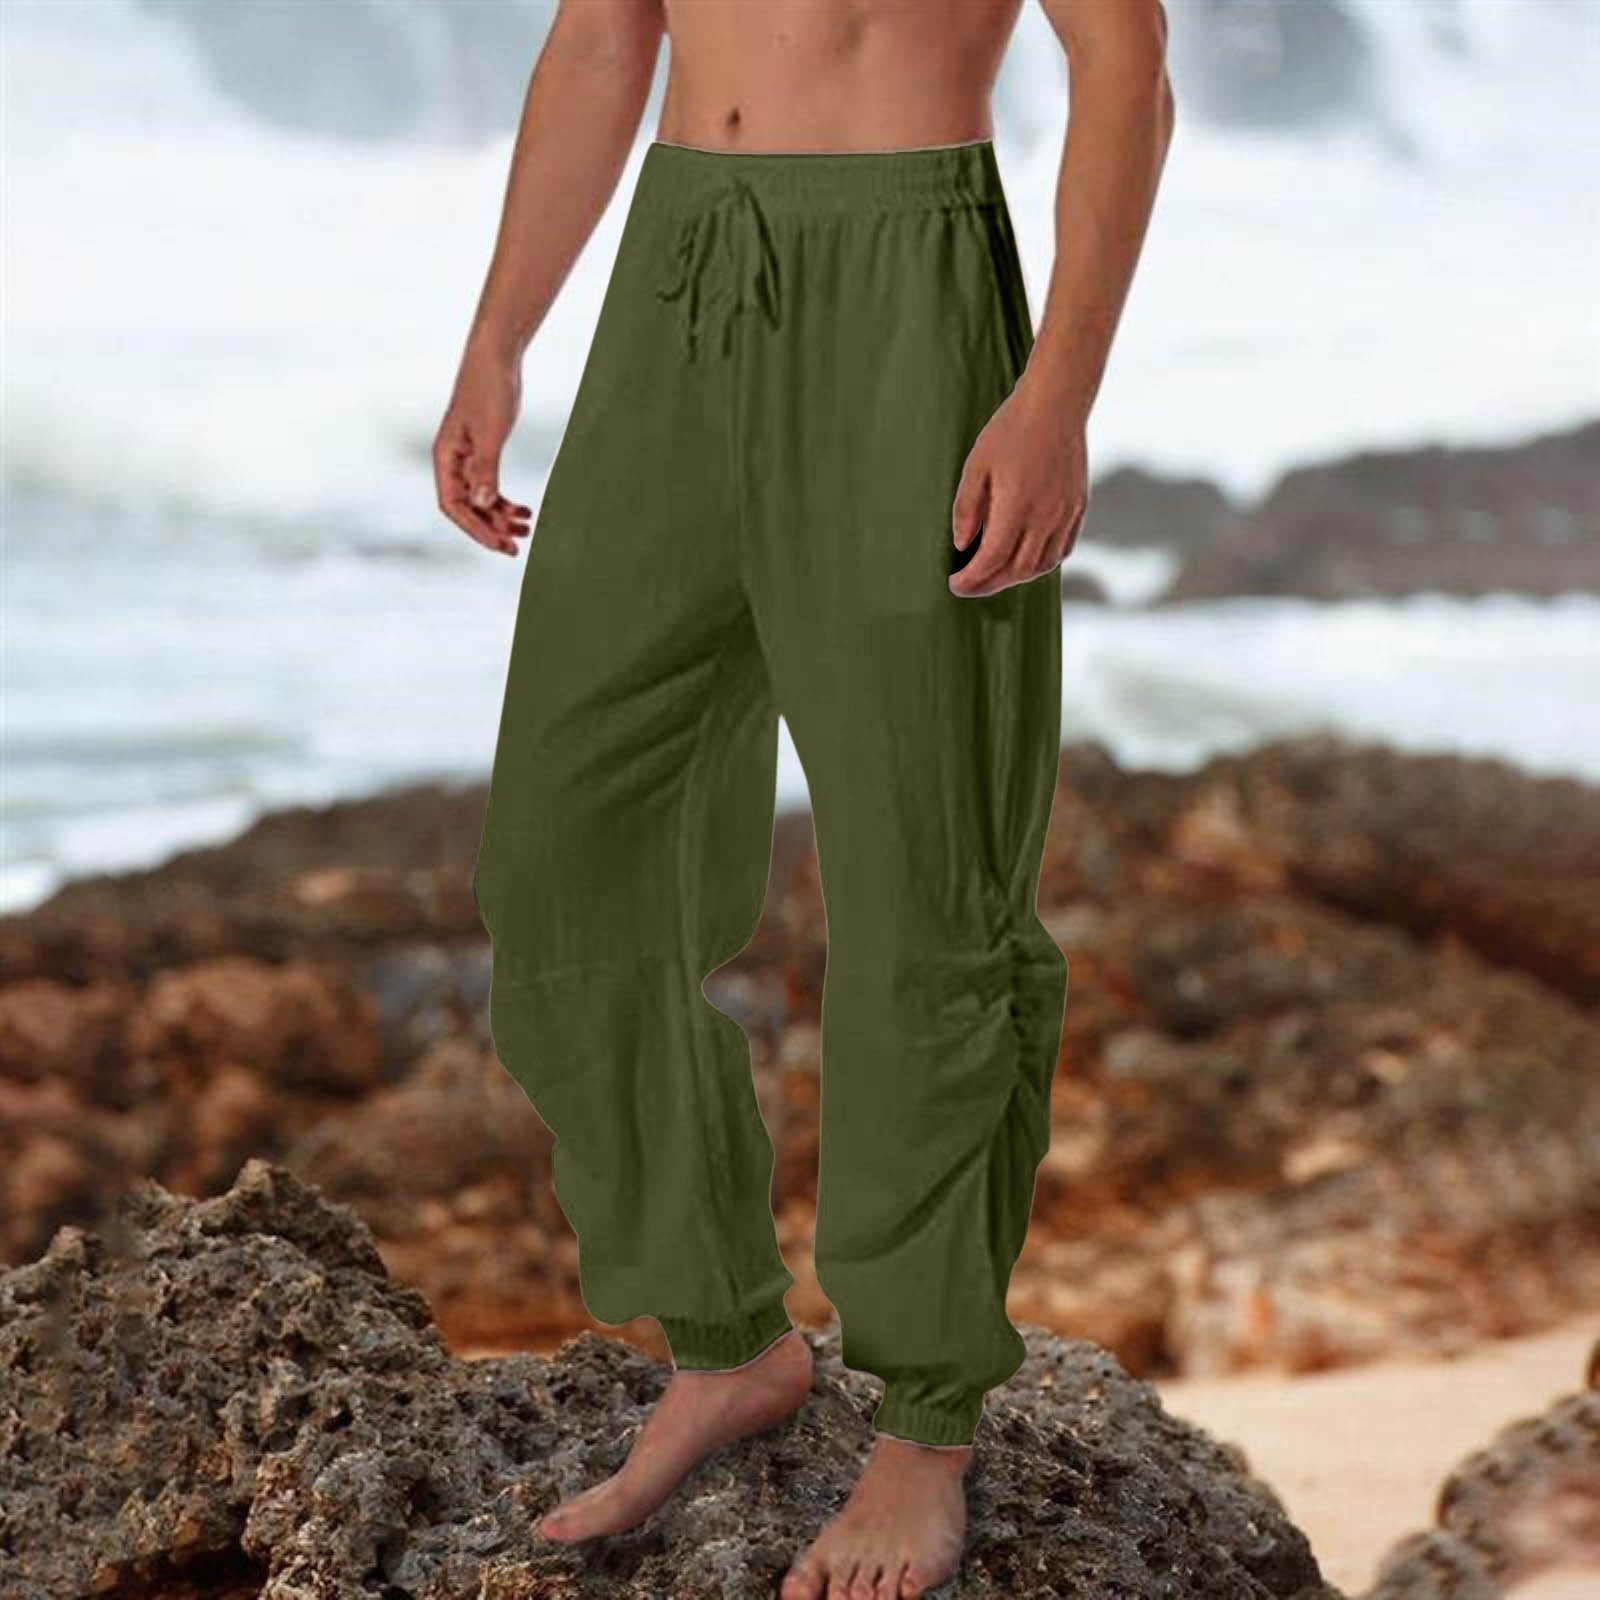 Winter Savings! RQYYD Cargo Pants for Mens Lightweight Work Pants Hiking  Ripstop Cargo Pants Cargo Pant-Reg and Big and Tall Sizes(Army Green,XXL)